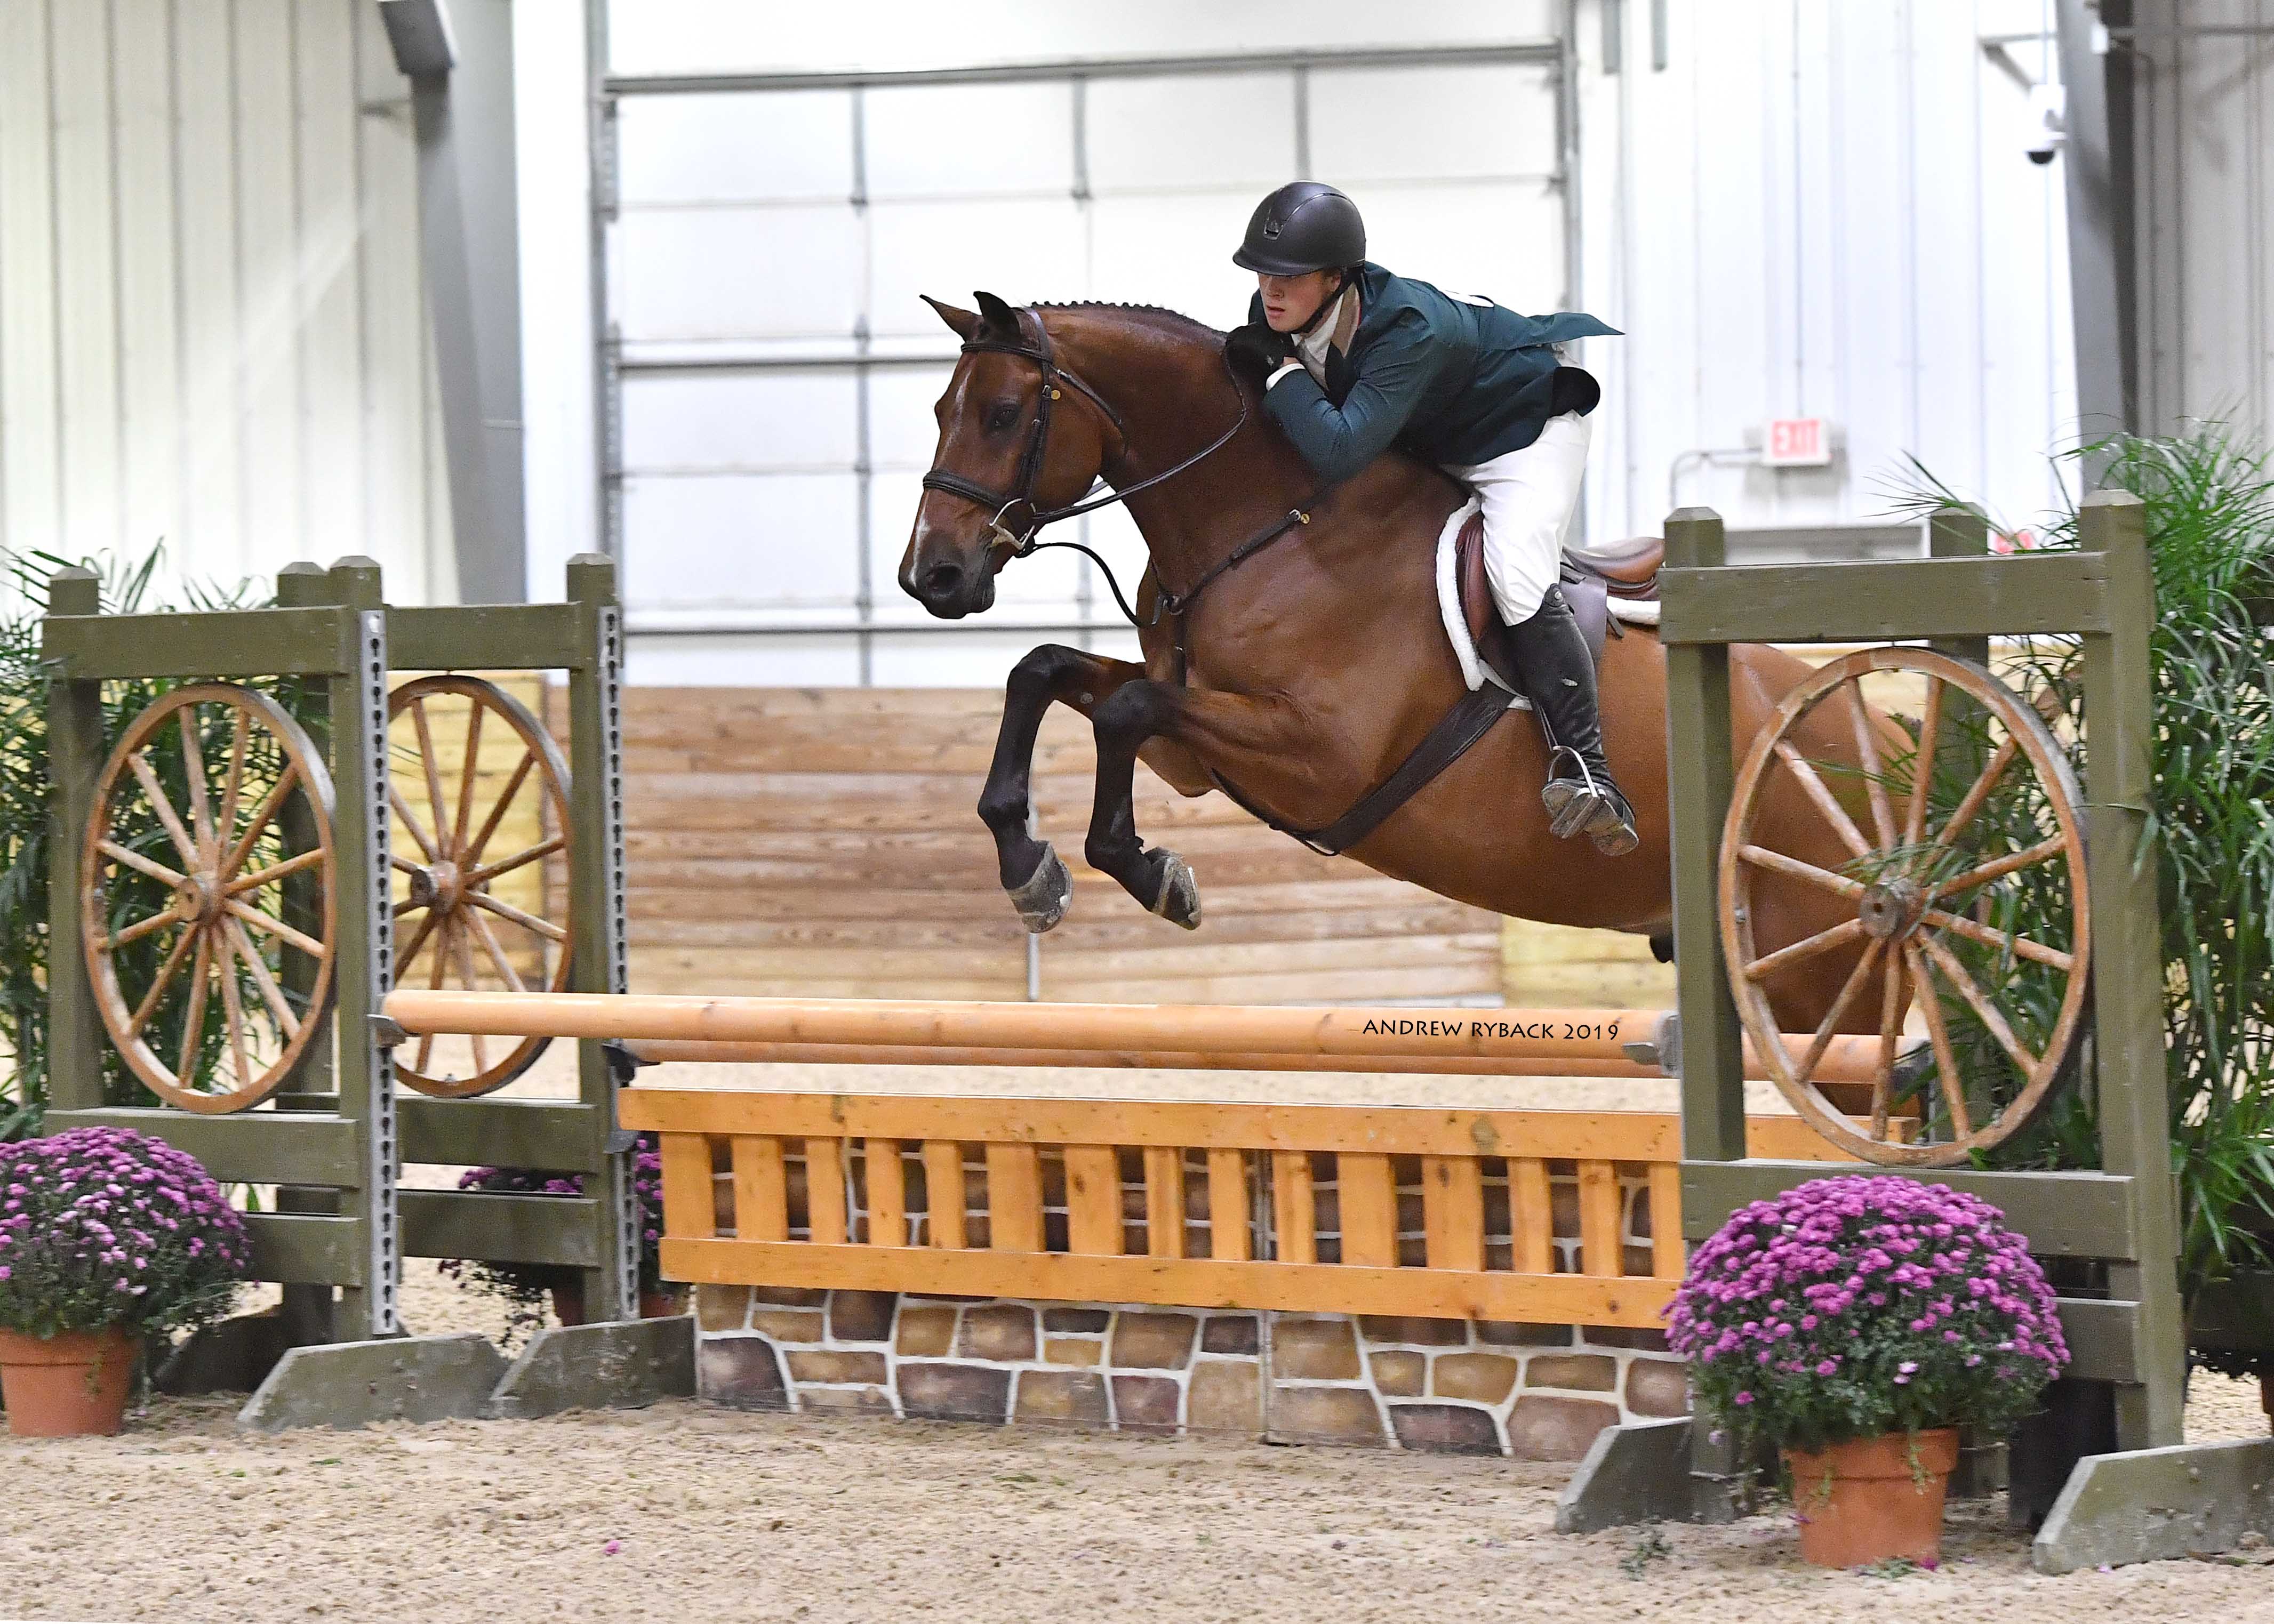 Greg Crolick and Corallo Z Equestrian Honors the $40,000 Take Center Hunter Derby in Top USHJA International World 